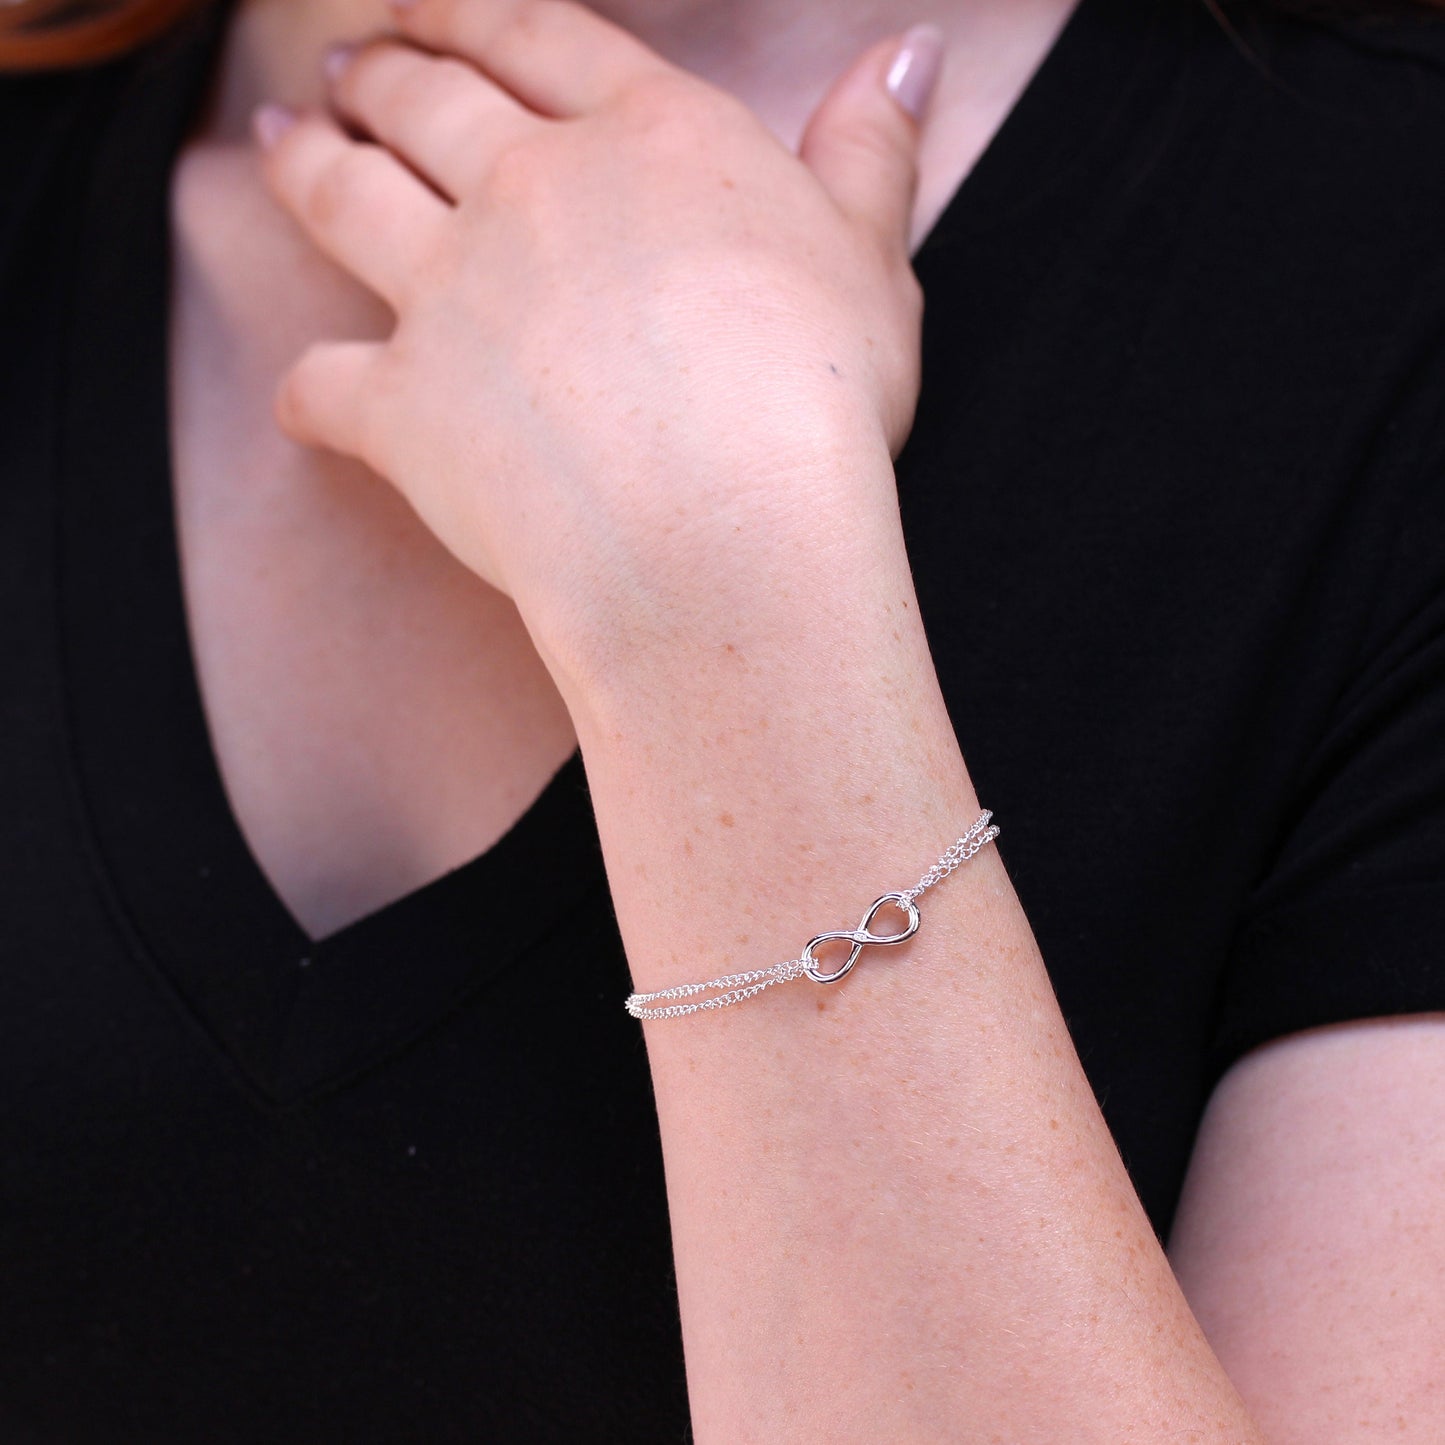 Sterling Silver Rolo Chain Adjustable Bracelet with Large Infinity Charm